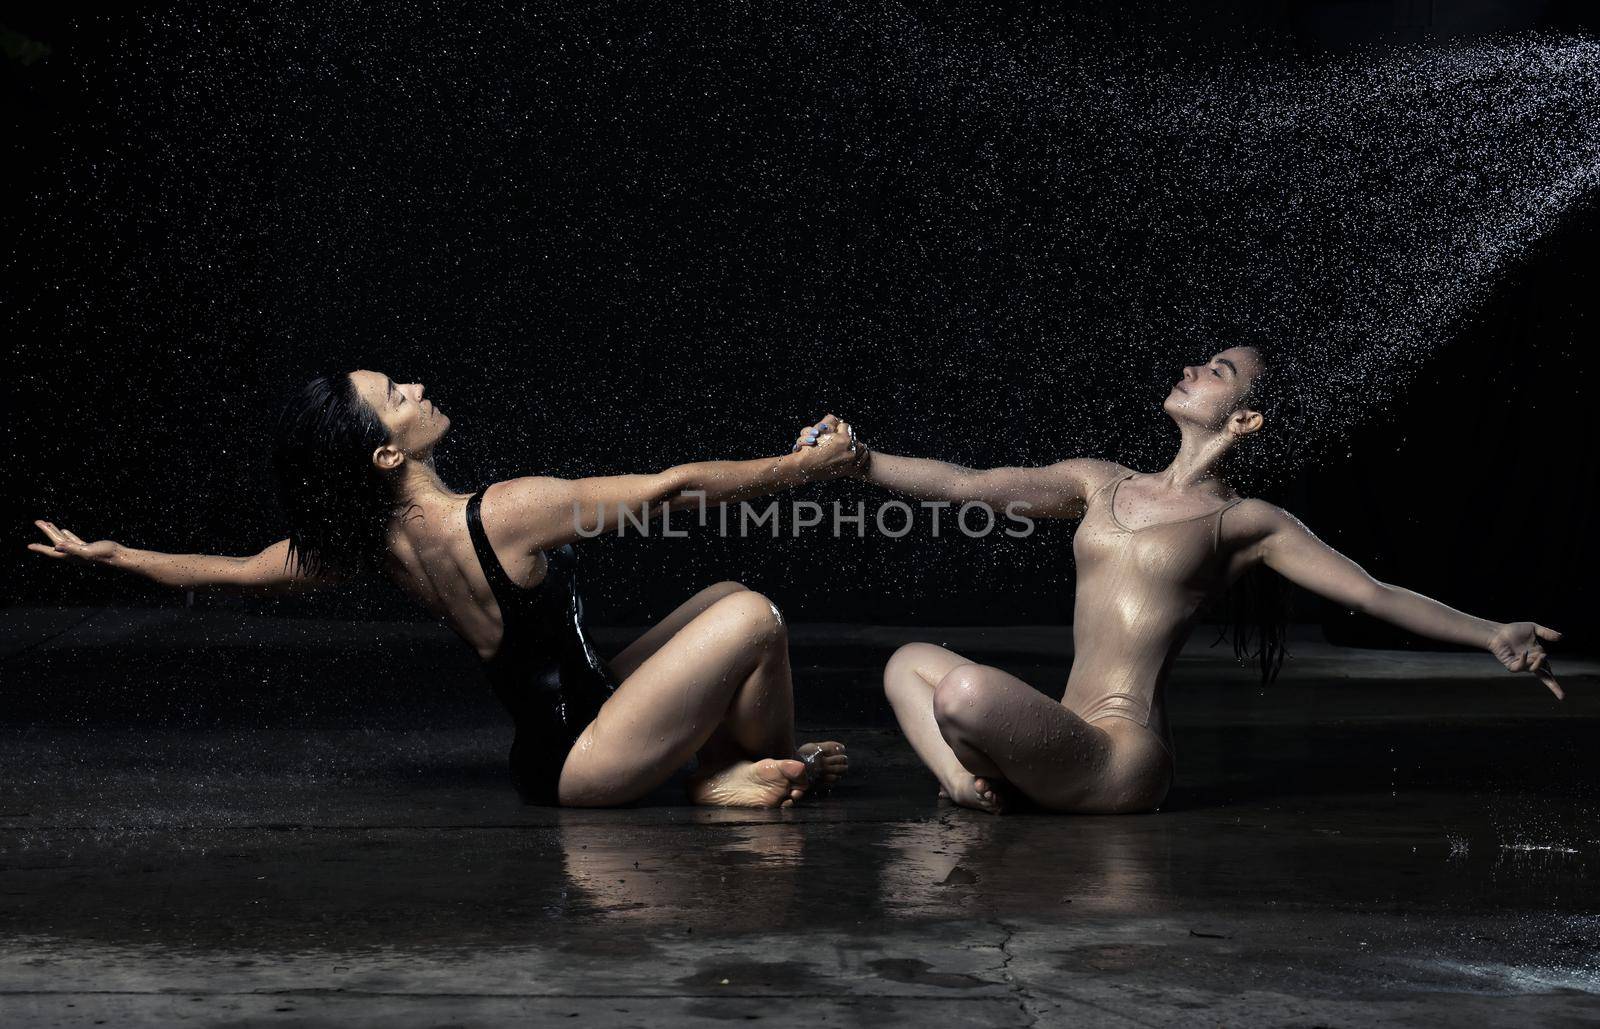 two beautiful women of Caucasian appearance with dark hair are sitting on the asphalt in drops of water on a black background, holding hands and looking up. People are wearing bodysuits